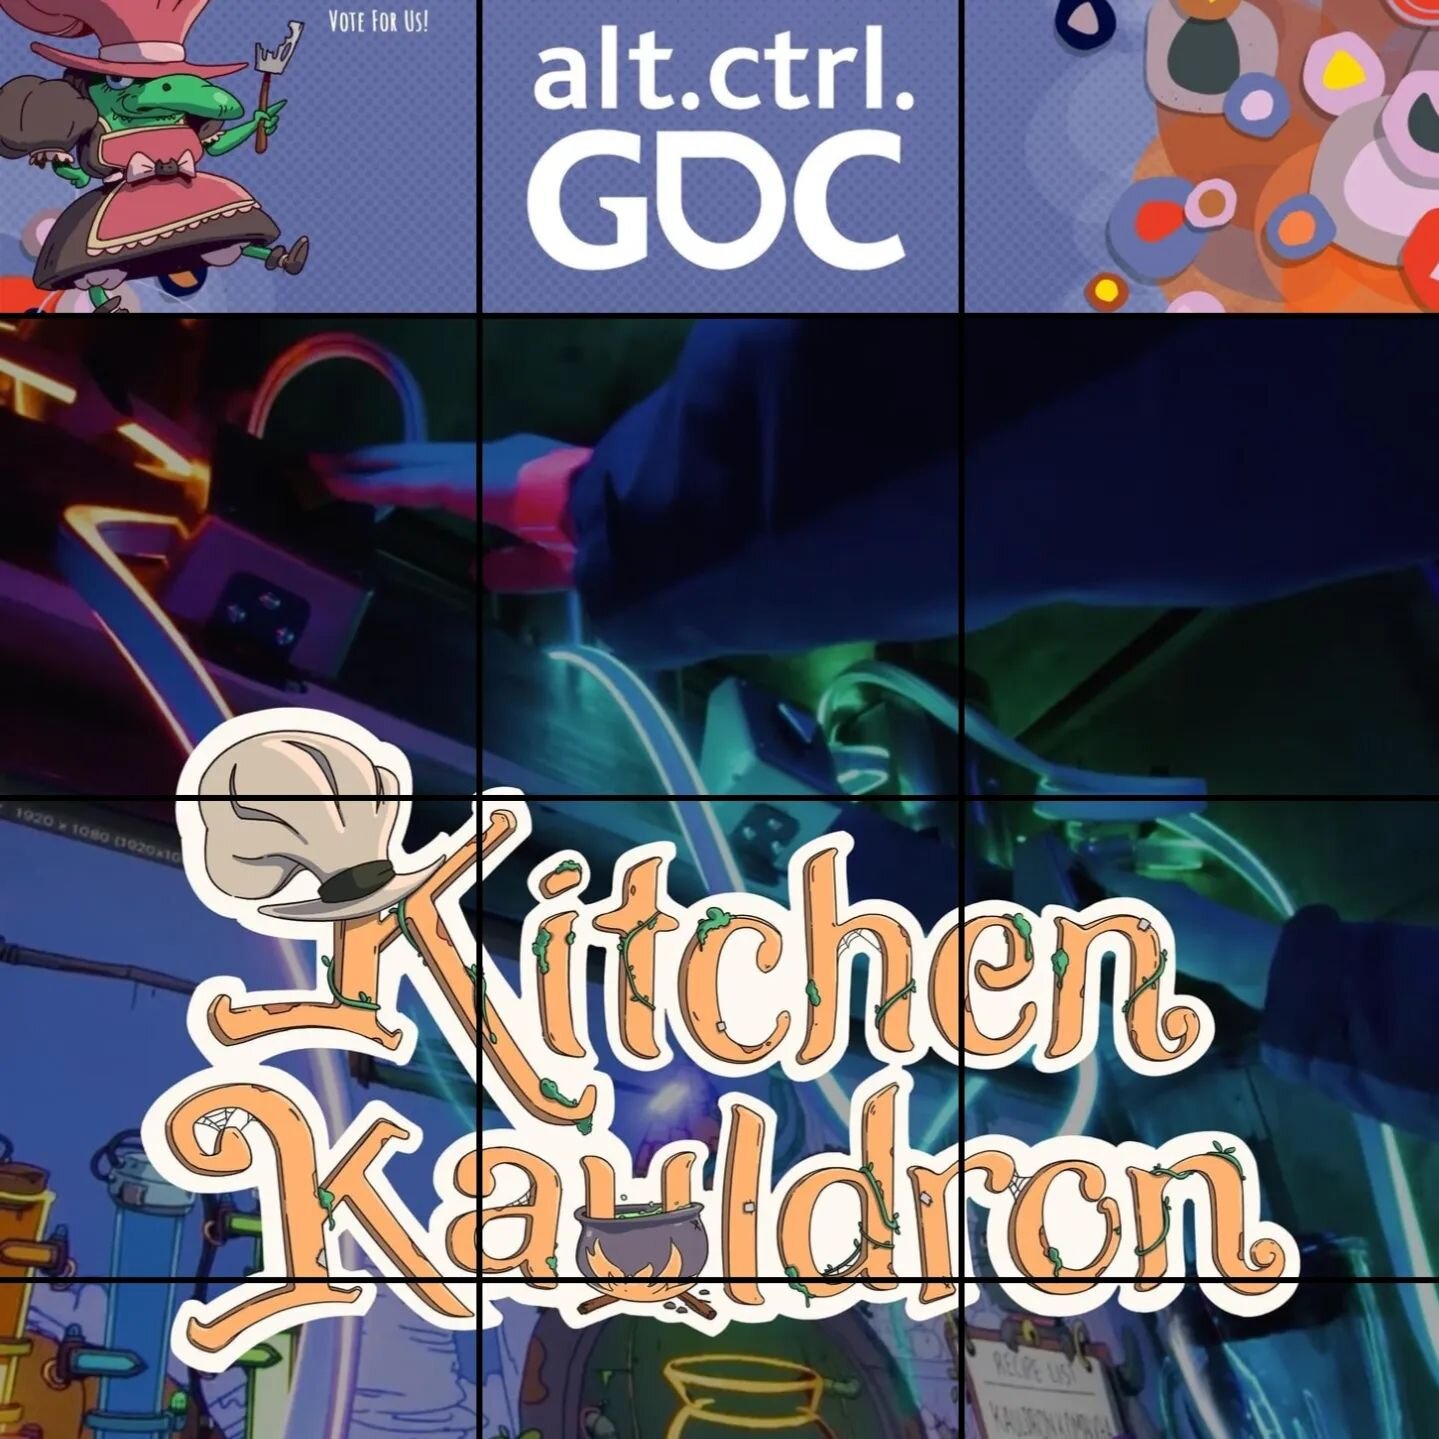 The Kitchen Kauldron is a finalist in the alt.ctrl.GDC showcase at @official_gdc this year! Honored to be in this position, but there's still half a day of voting up! Please visit the @kitchenkauldron IG page for more details about the game-project, 